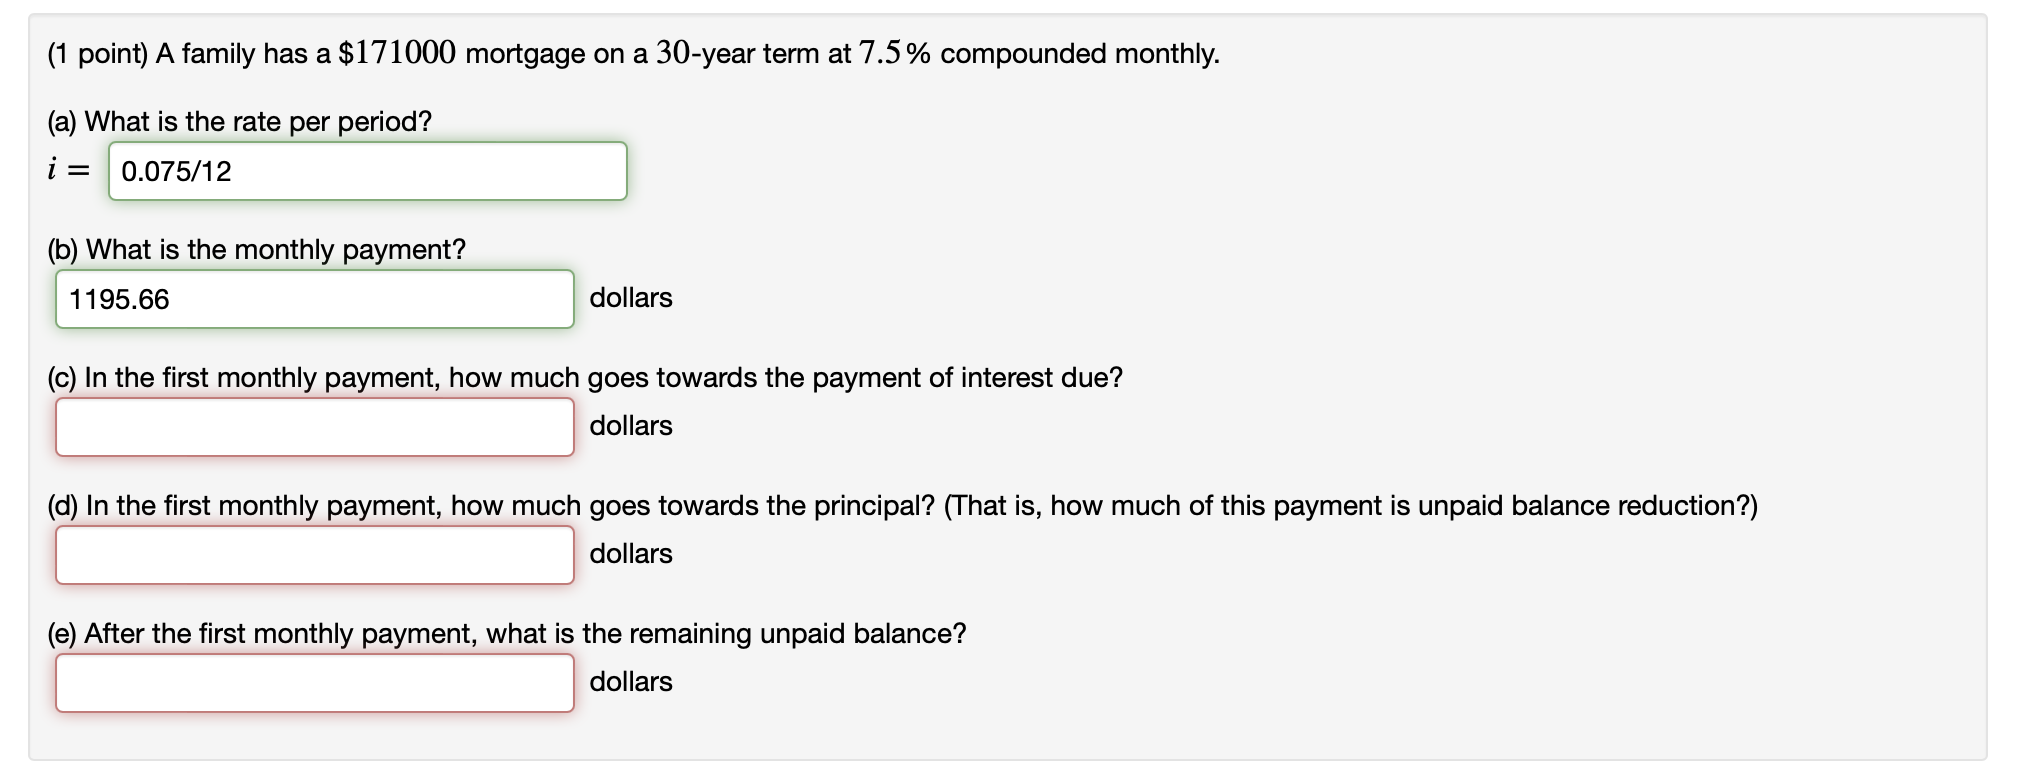 (1 point) A family has a $171000 mortgage on a 30-year term at 7.5% compounded monthly. (a) What is the rate